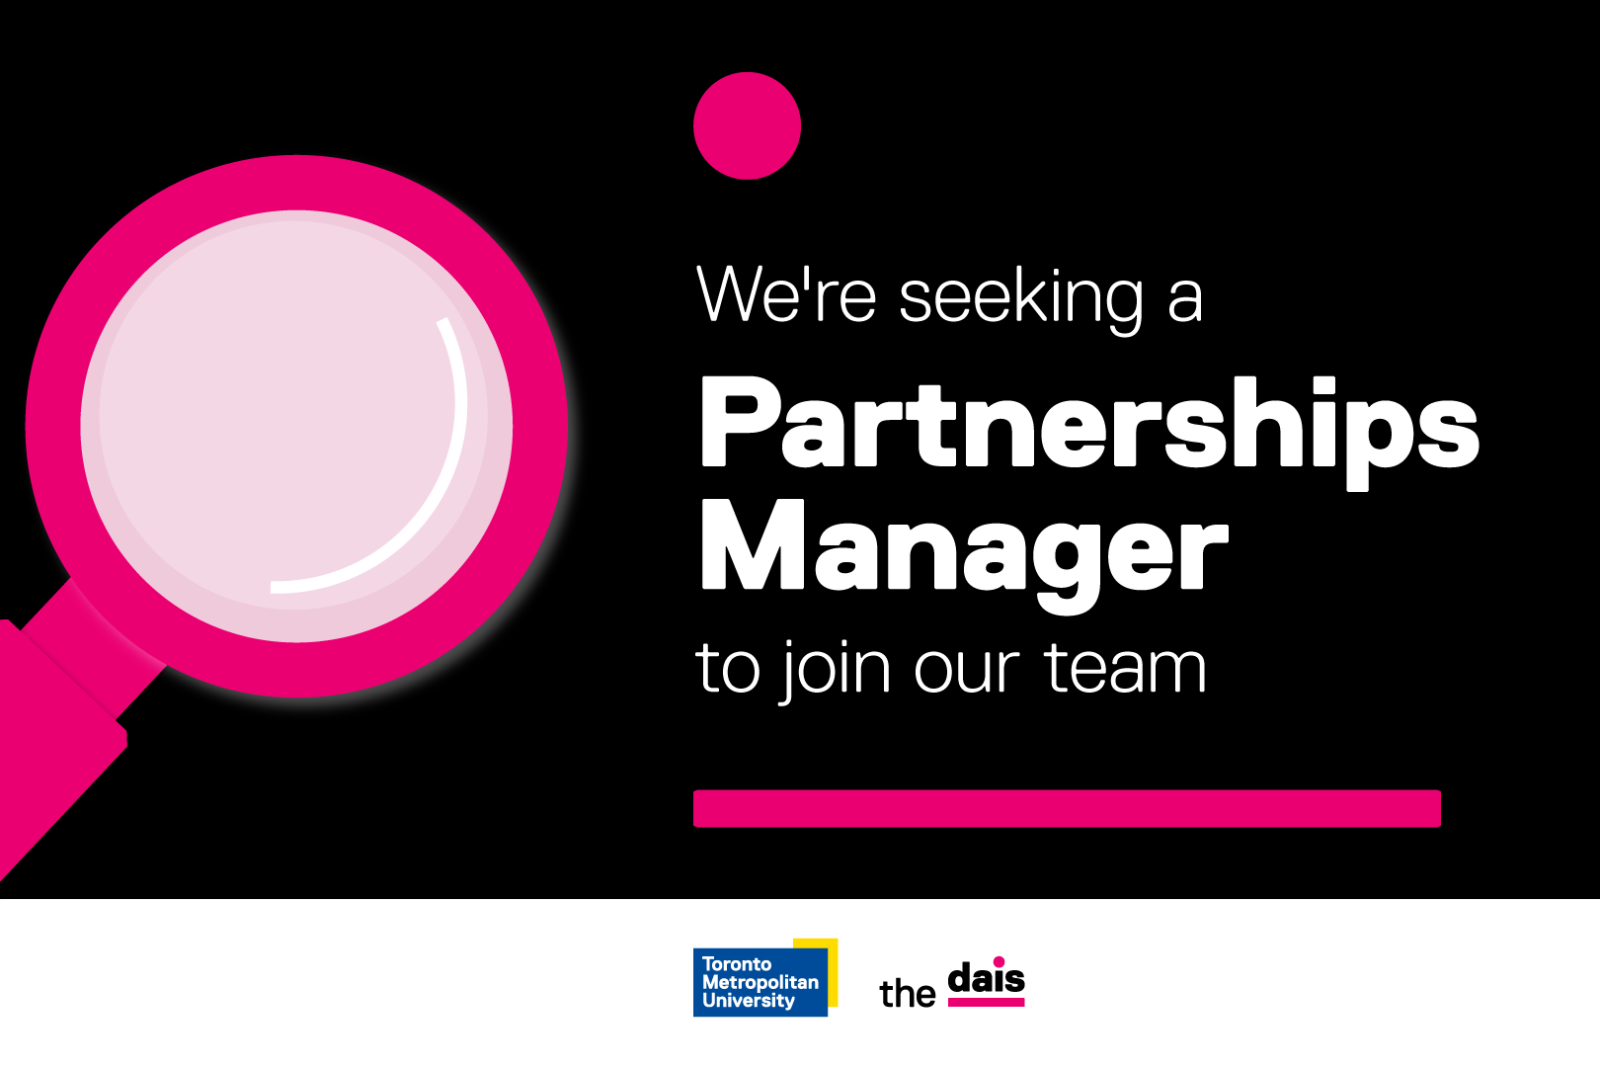 We're seeking a Partnerships Manager to join our team